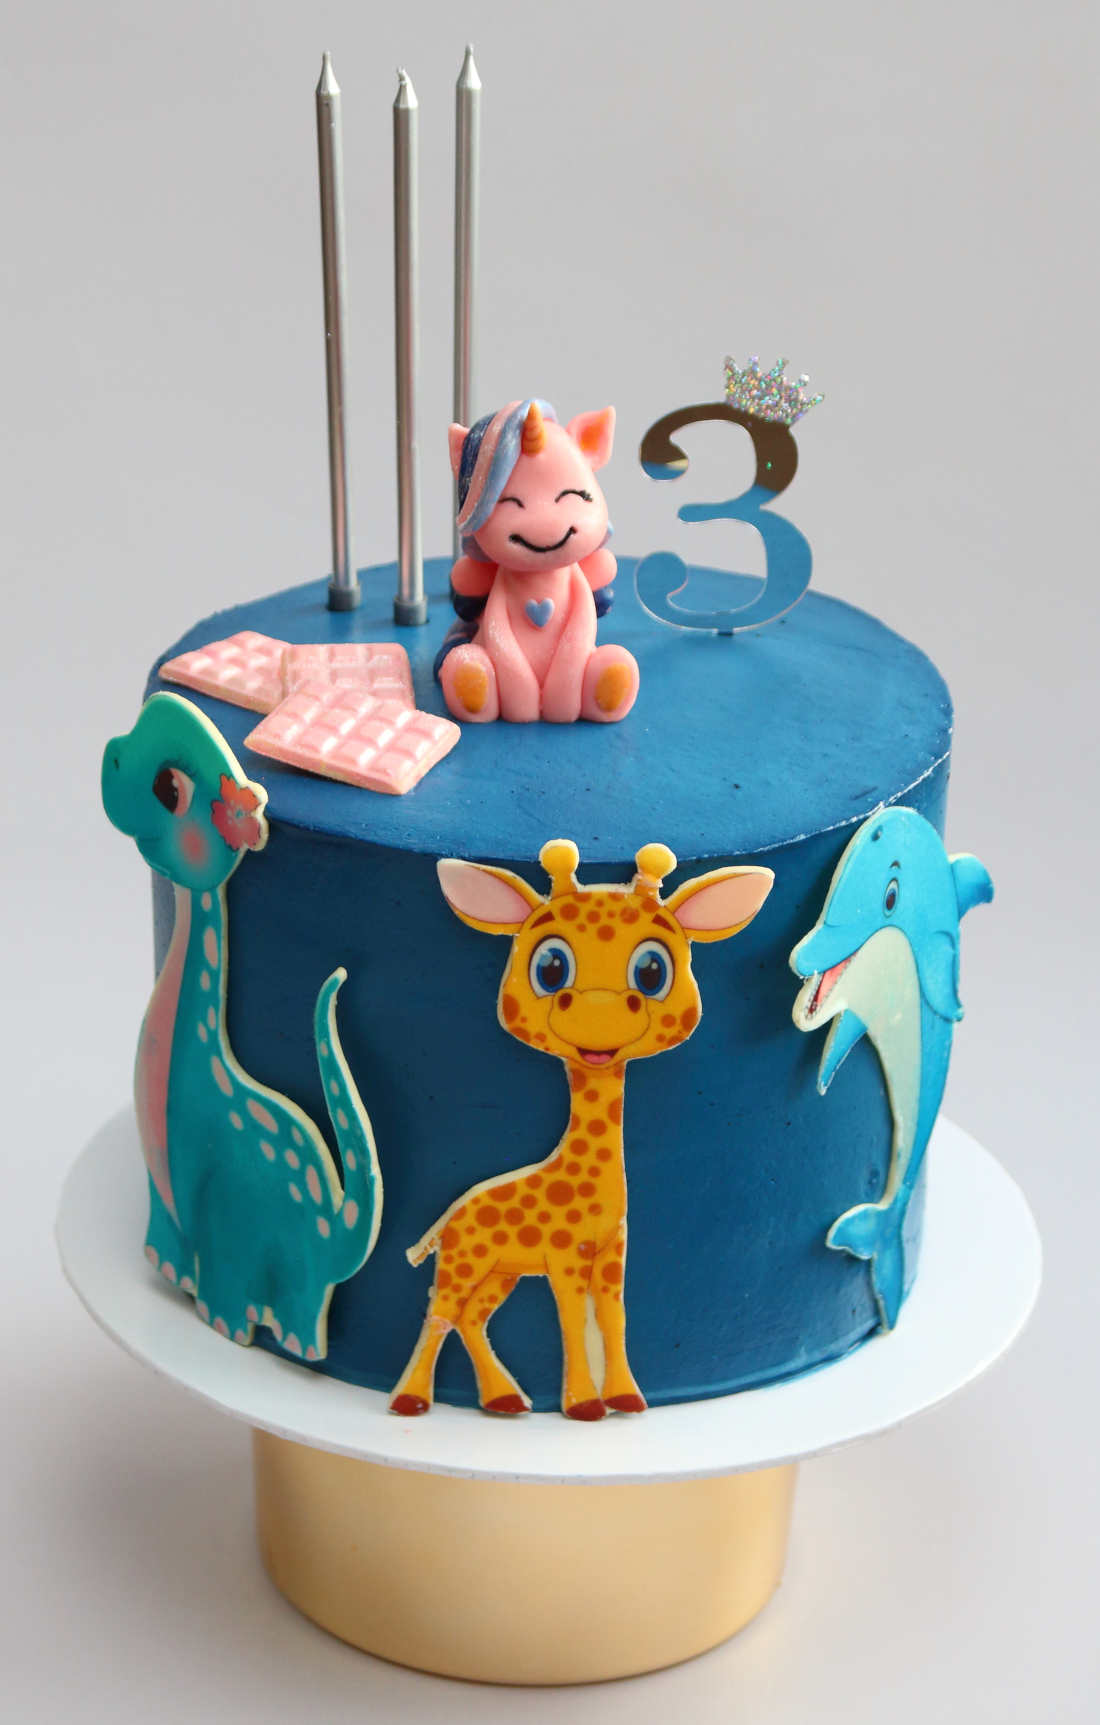 Pink unicorn on a cake for a girl's birthday